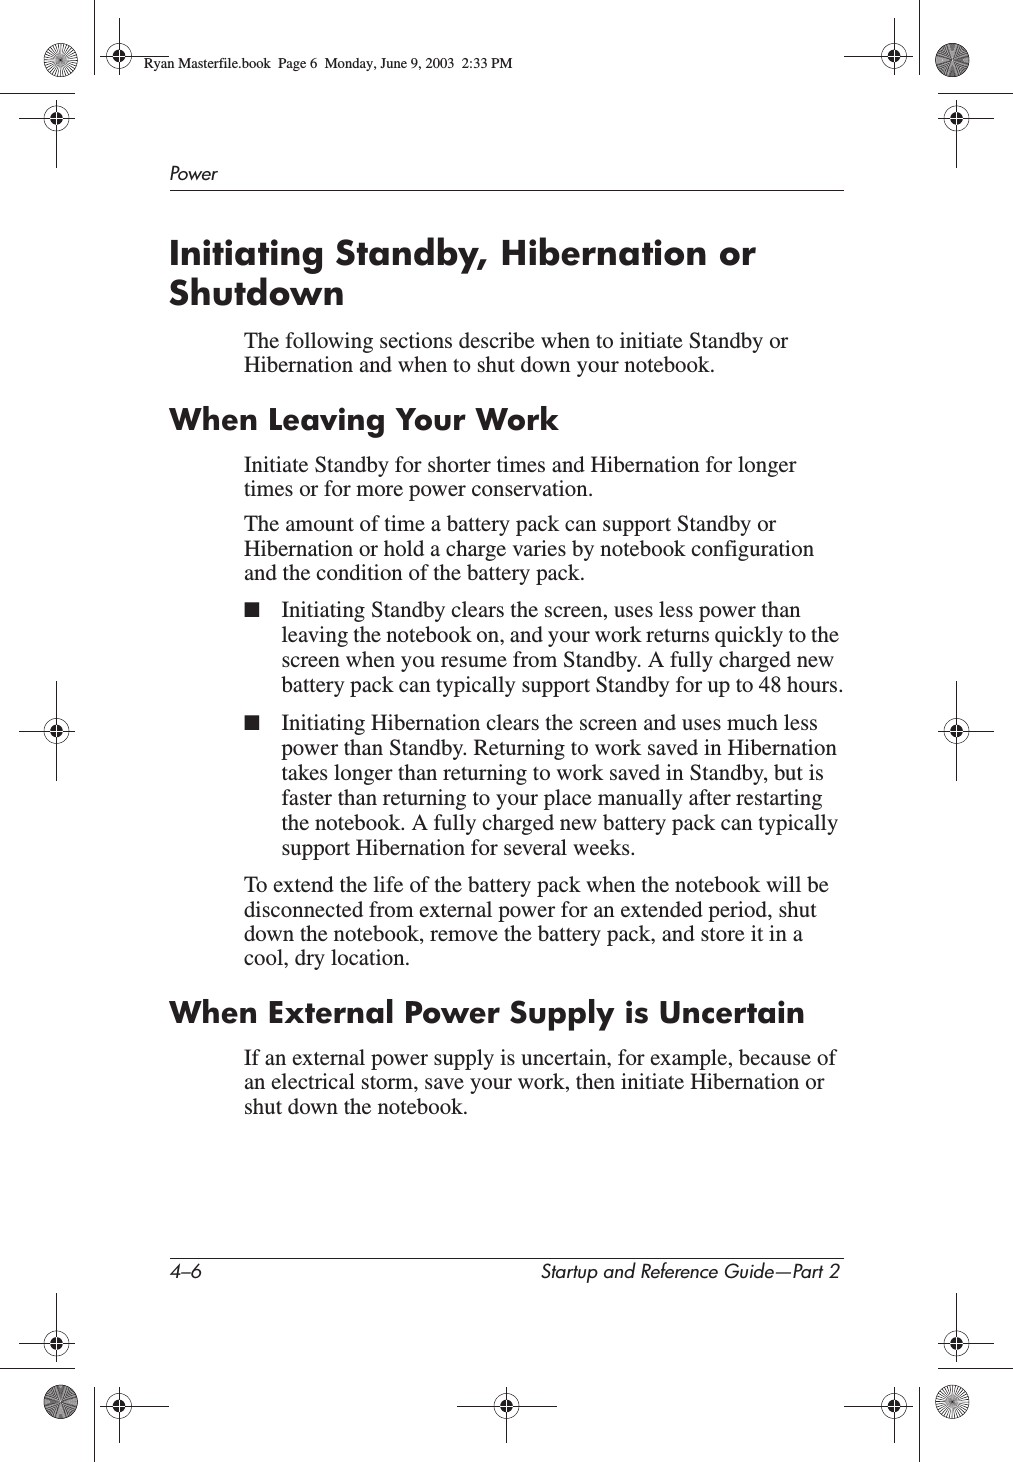 4–6 Startup and Reference Guide—Part 2PowerInitiating Standby, Hibernation or ShutdownThe following sections describe when to initiate Standby or Hibernation and when to shut down your notebook.When Leaving Your WorkInitiate Standby for shorter times and Hibernation for longer times or for more power conservation.The amount of time a battery pack can support Standby or Hibernation or hold a charge varies by notebook configuration and the condition of the battery pack.■Initiating Standby clears the screen, uses less power than leaving the notebook on, and your work returns quickly to the screen when you resume from Standby. A fully charged new battery pack can typically support Standby for up to 48 hours.■Initiating Hibernation clears the screen and uses much less power than Standby. Returning to work saved in Hibernation takes longer than returning to work saved in Standby, but is faster than returning to your place manually after restarting the notebook. A fully charged new battery pack can typically support Hibernation for several weeks.To extend the life of the battery pack when the notebook will be disconnected from external power for an extended period, shut down the notebook, remove the battery pack, and store it in a cool, dry location.When External Power Supply is UncertainIf an external power supply is uncertain, for example, because of an electrical storm, save your work, then initiate Hibernation or shut down the notebook.Ryan Masterfile.book  Page 6  Monday, June 9, 2003  2:33 PM